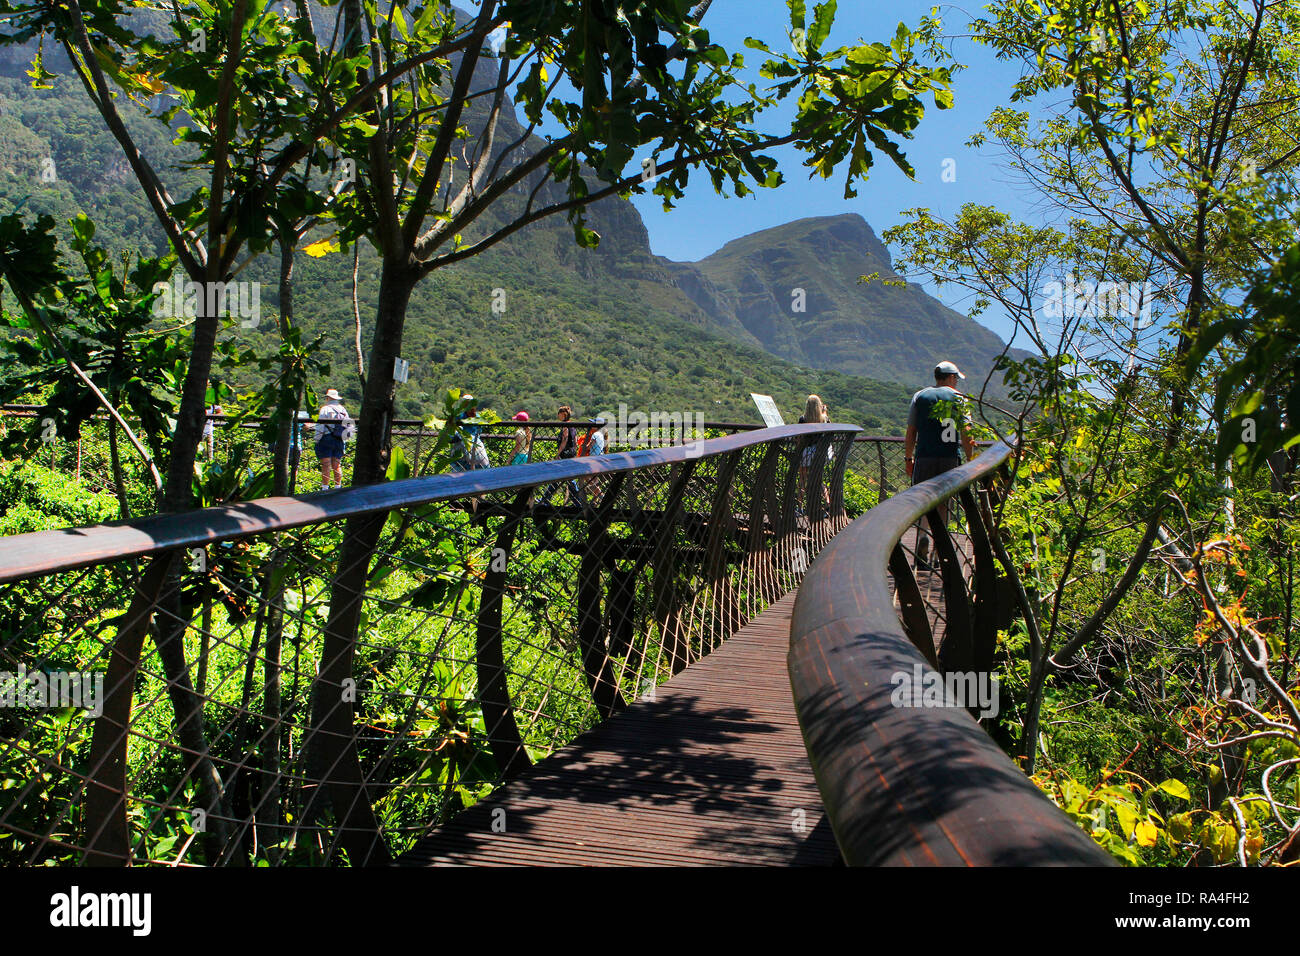 Visitors walking on the boomslang aerial walkway in Kirstenbosch National Botanical Garden in Cape Town, Western Cape Province, South Africa. Stock Photo